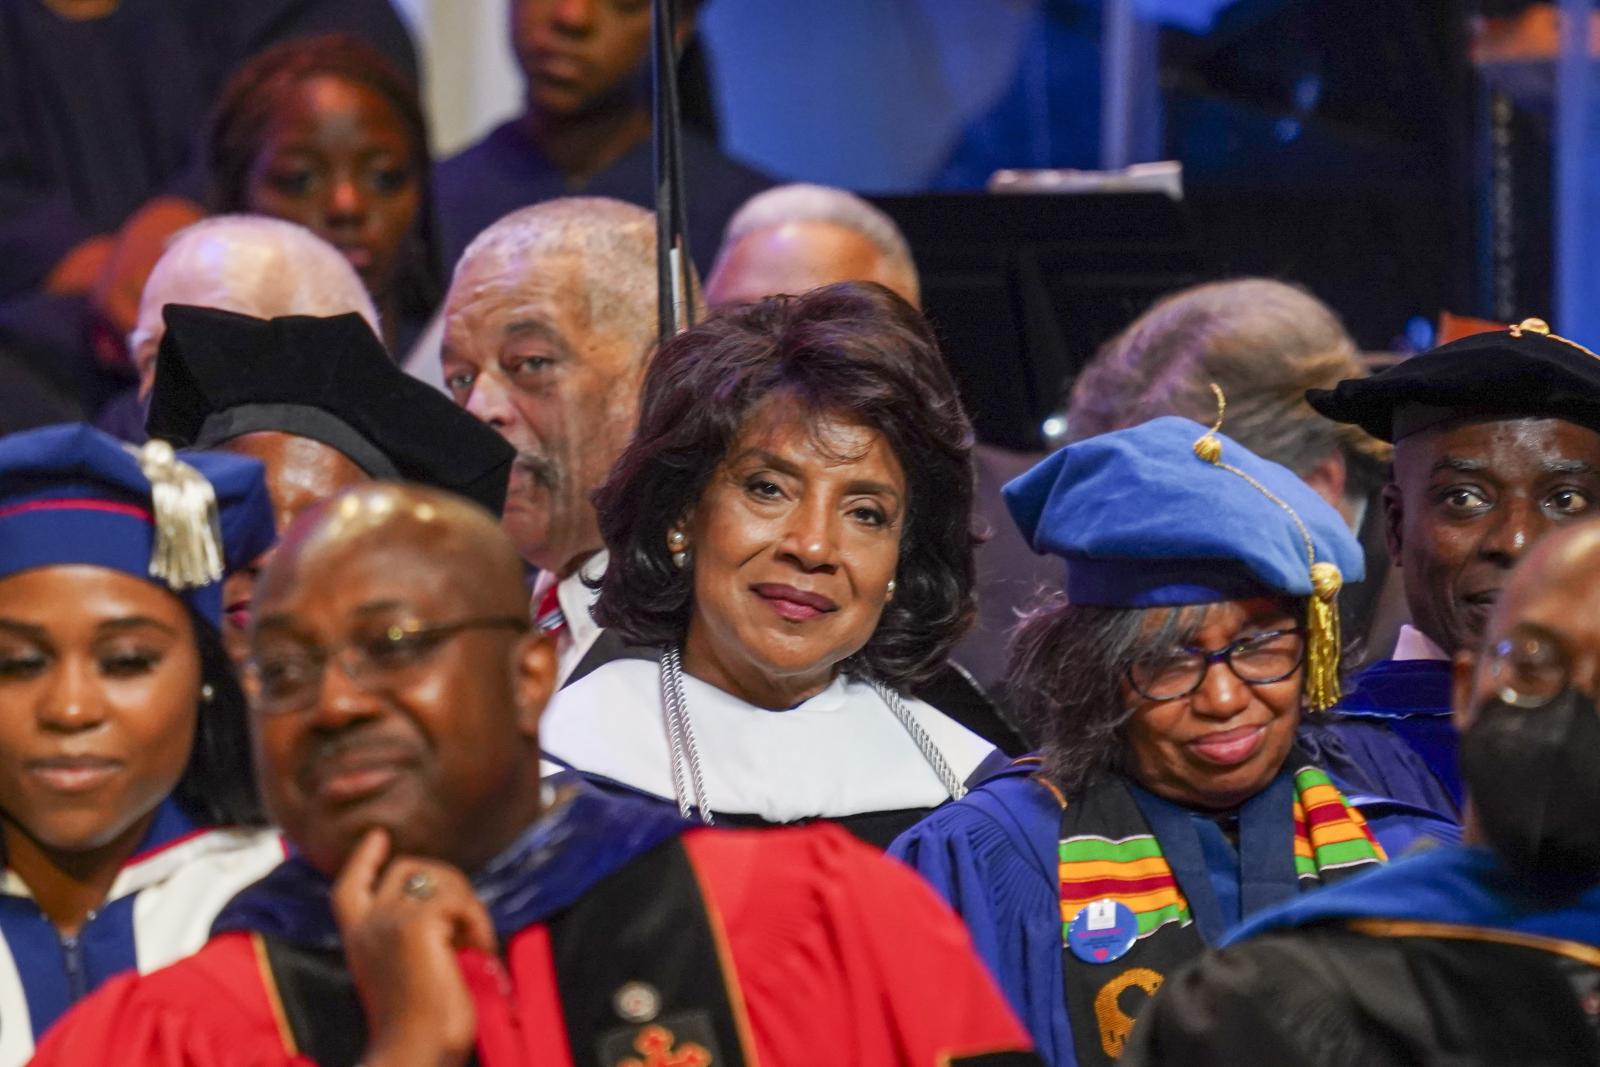 Dean of the Chadwick A. Boseman College of Fine Arts, Phylicia Rashad, listens intently while Congressman James E. Clyburn delivers the 155th Opening Convocation Address. Chris Campbell/Howard University